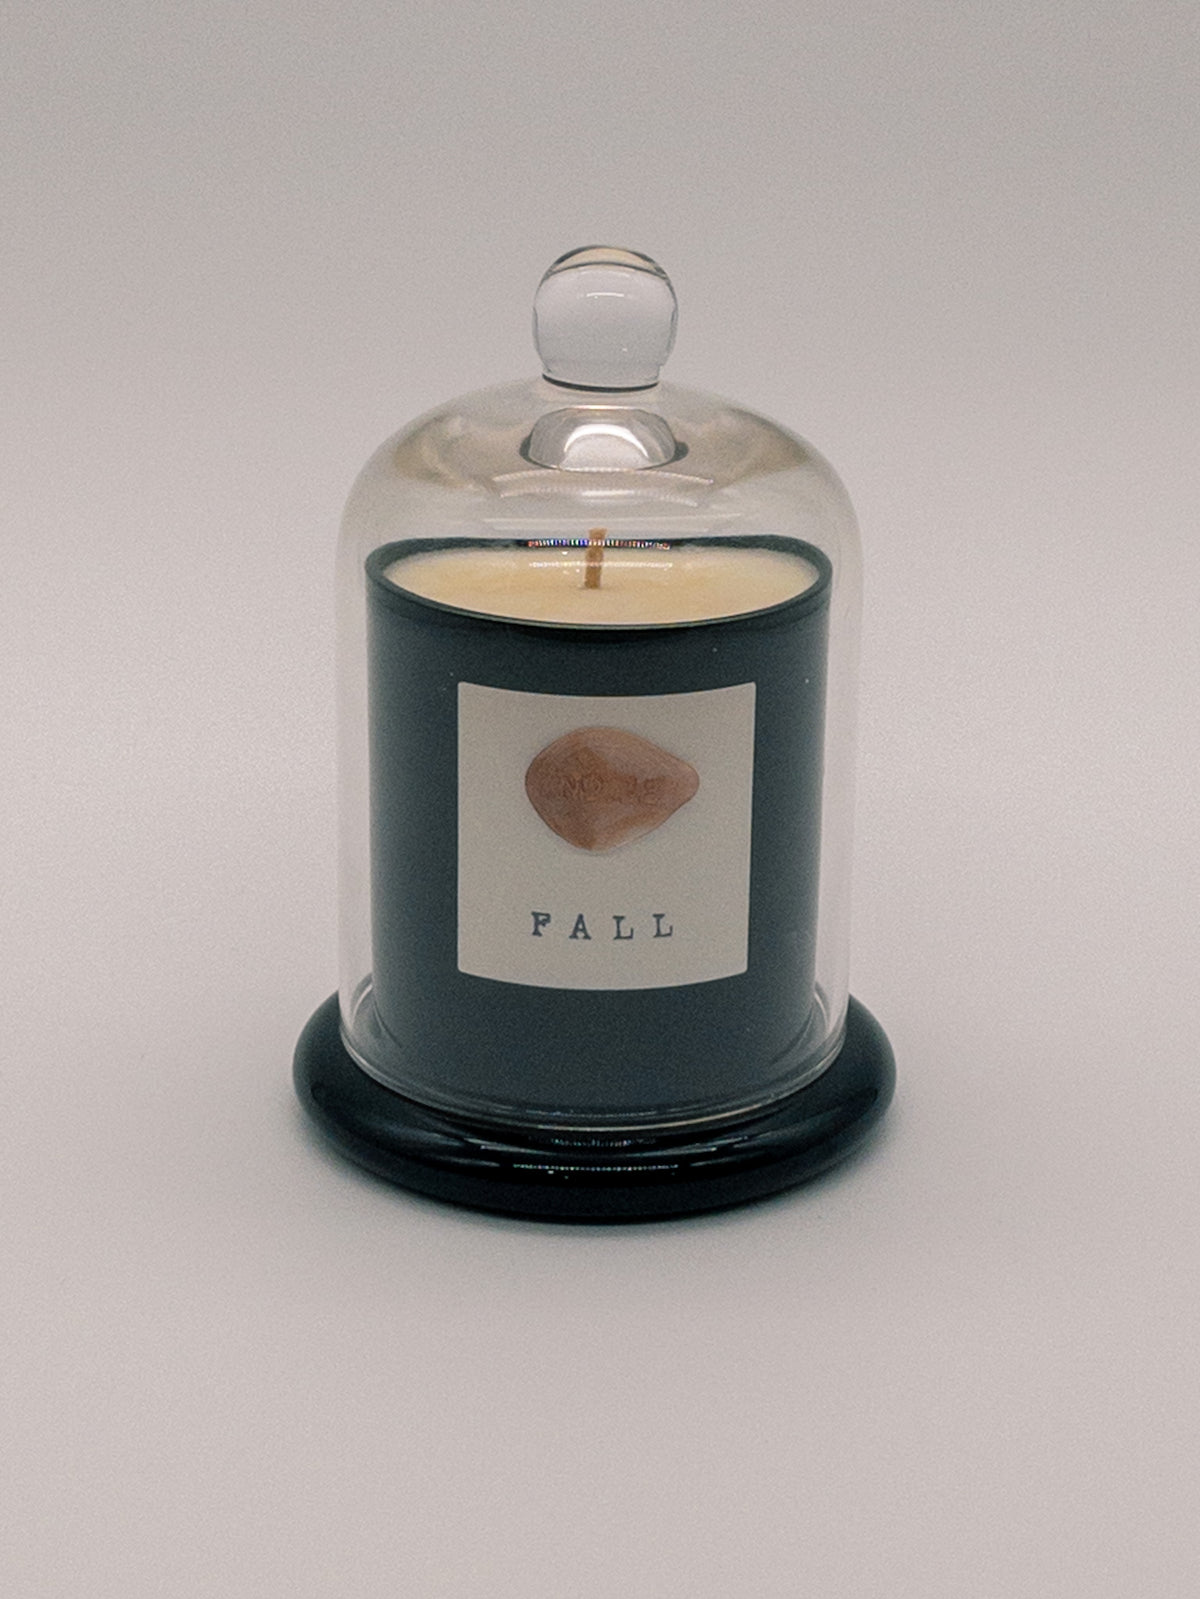 Fall No. 12 Candle and Cloche